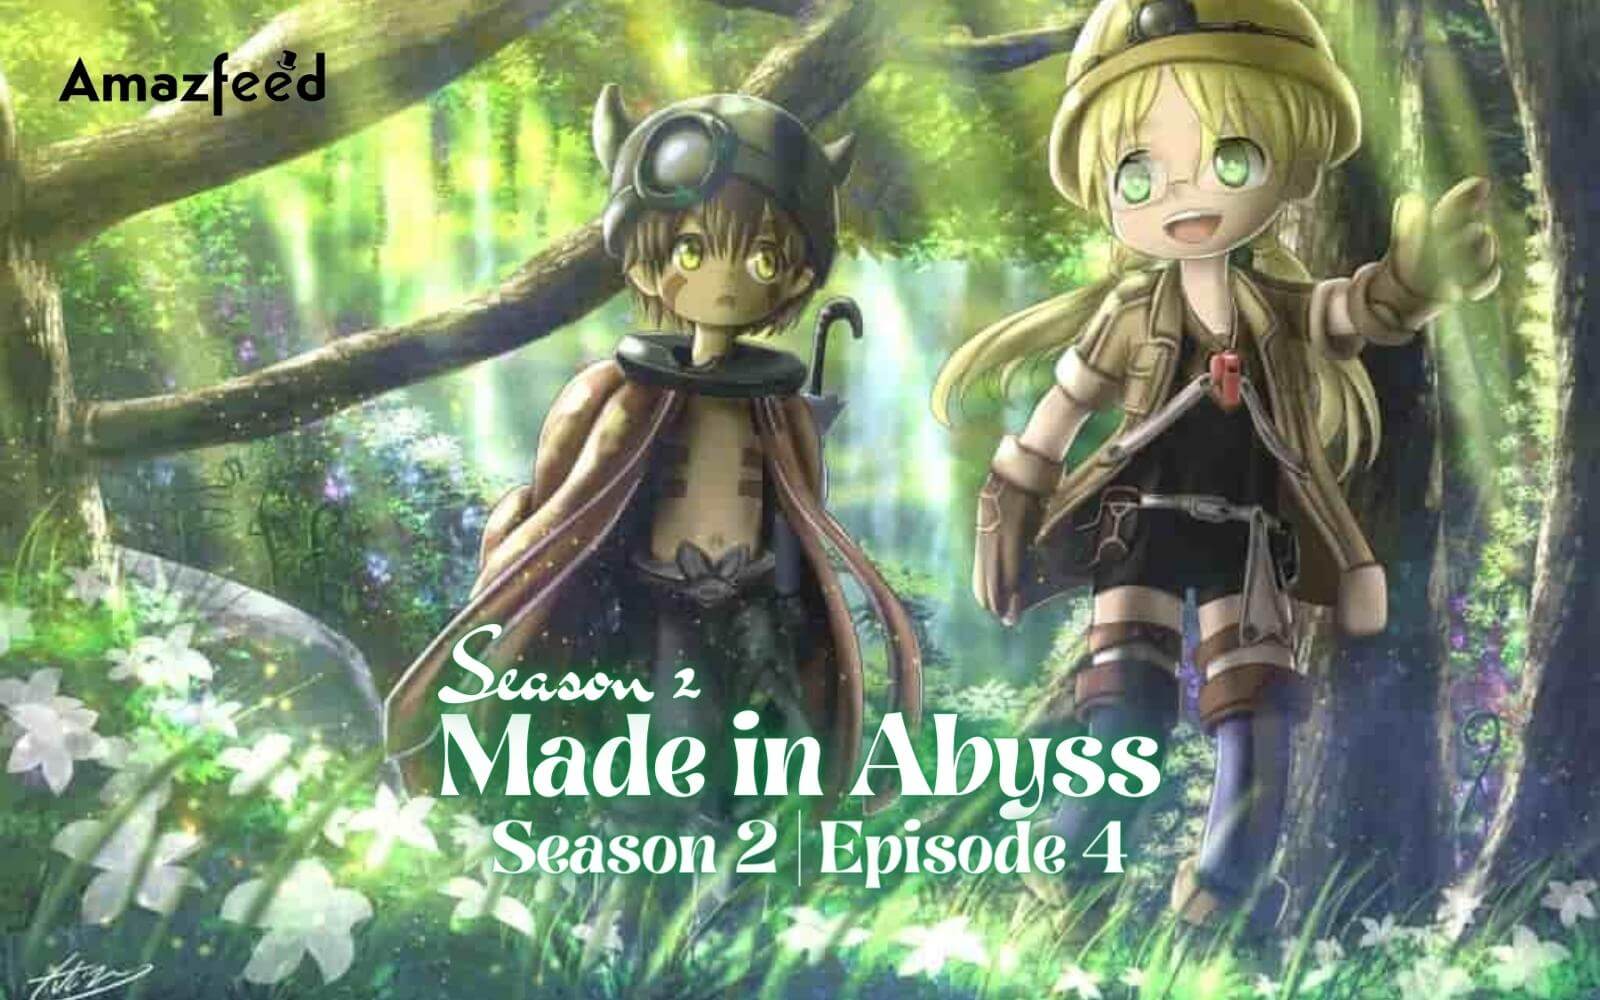 Made in Abyss Season 2 Episode 4: Where to Watch, Countdown, Release Date, Recap & Spoiler